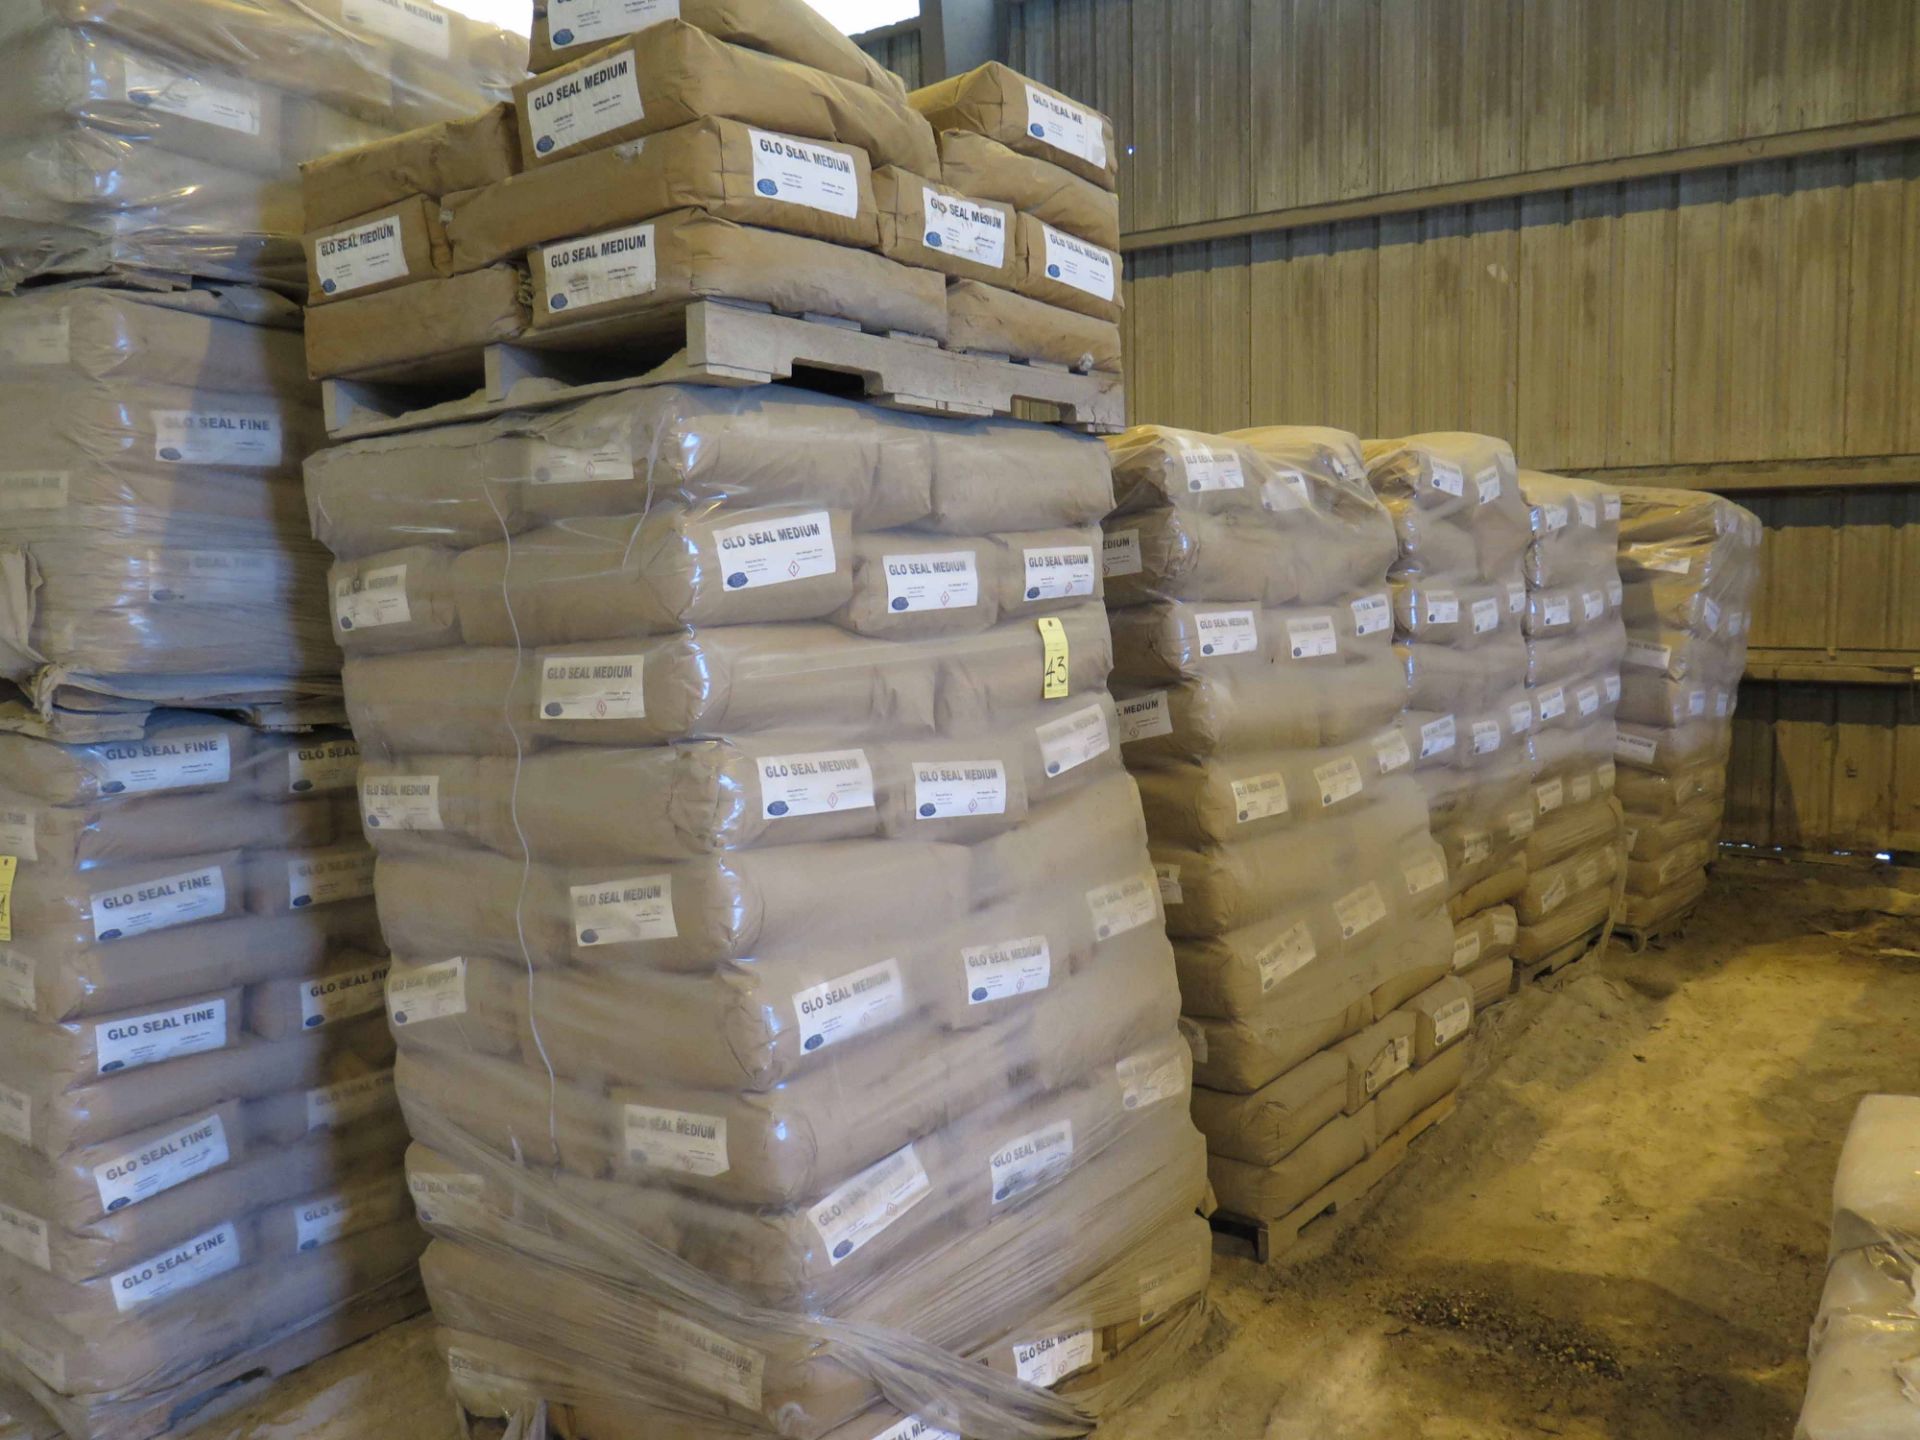 LOT OF GLO SEAL MEDIUM (approx. 328 bags) (Location #1: 374 Walter White Road, Trinity, TX 75862)